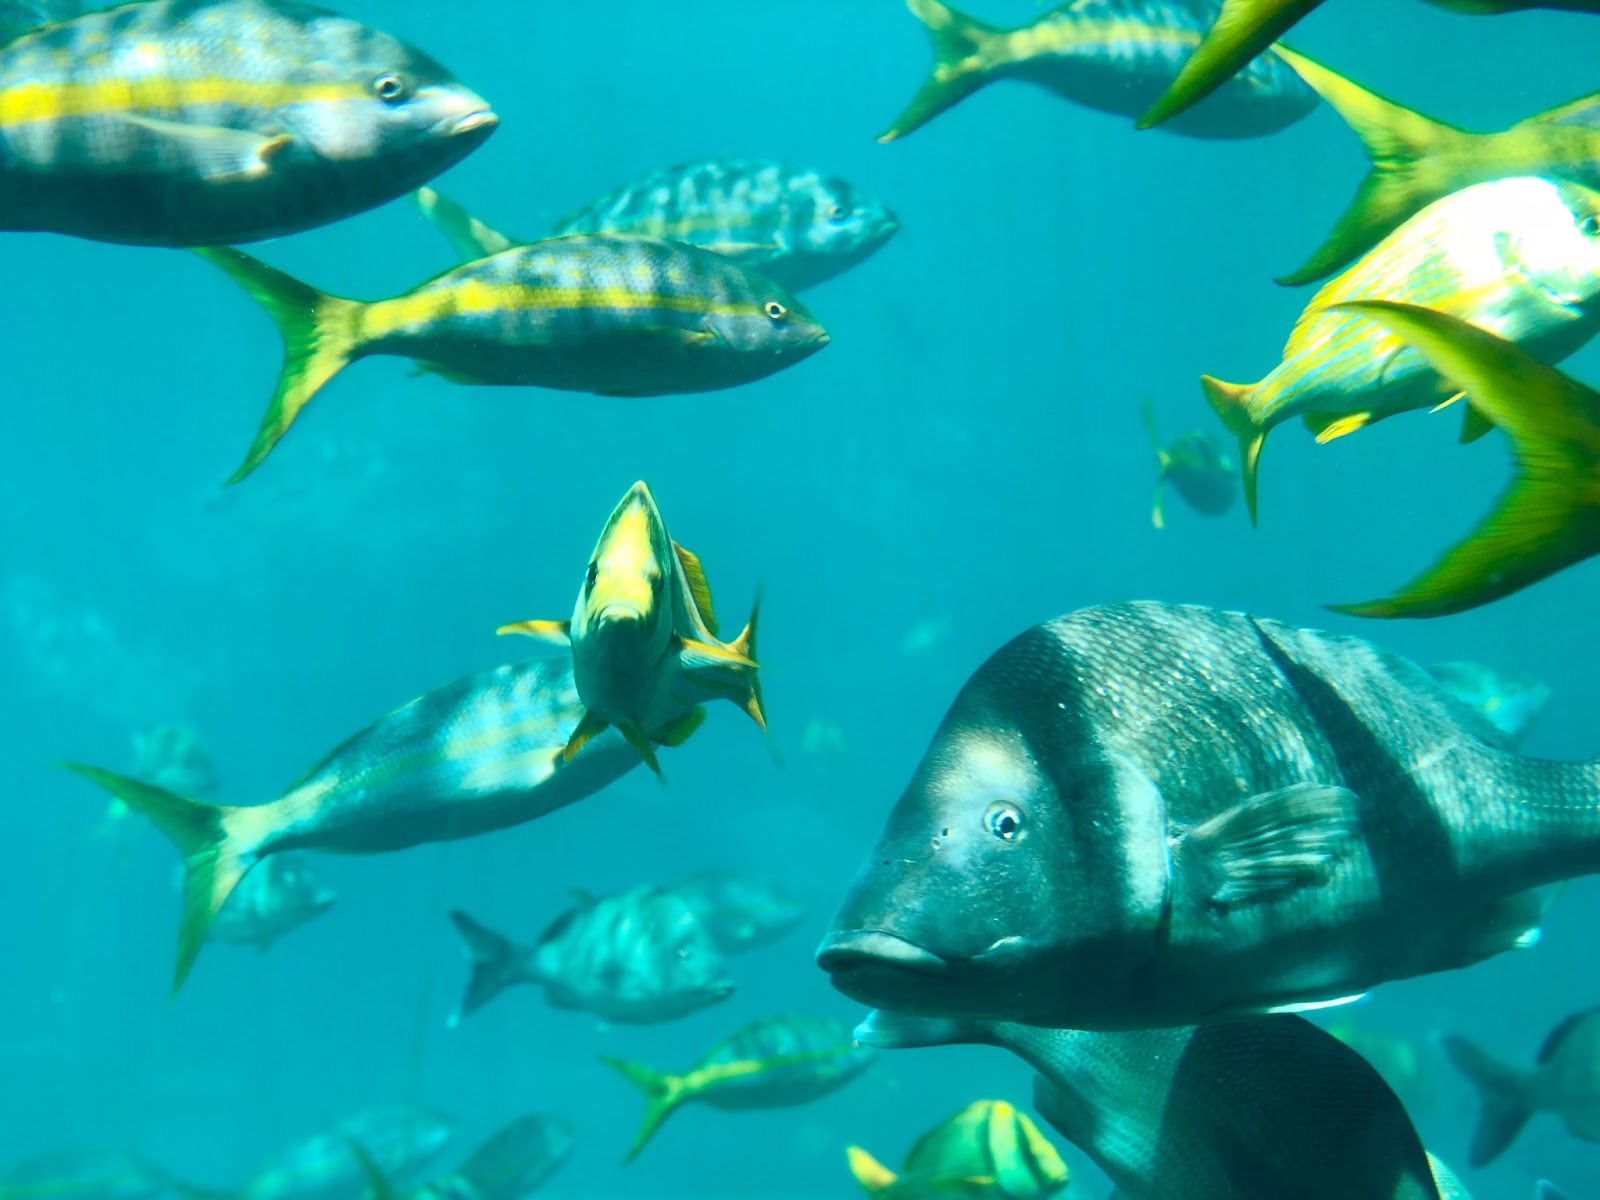 Crystal-clear waters, surrounded by colorful marine life at the Andros Barrier Reef.